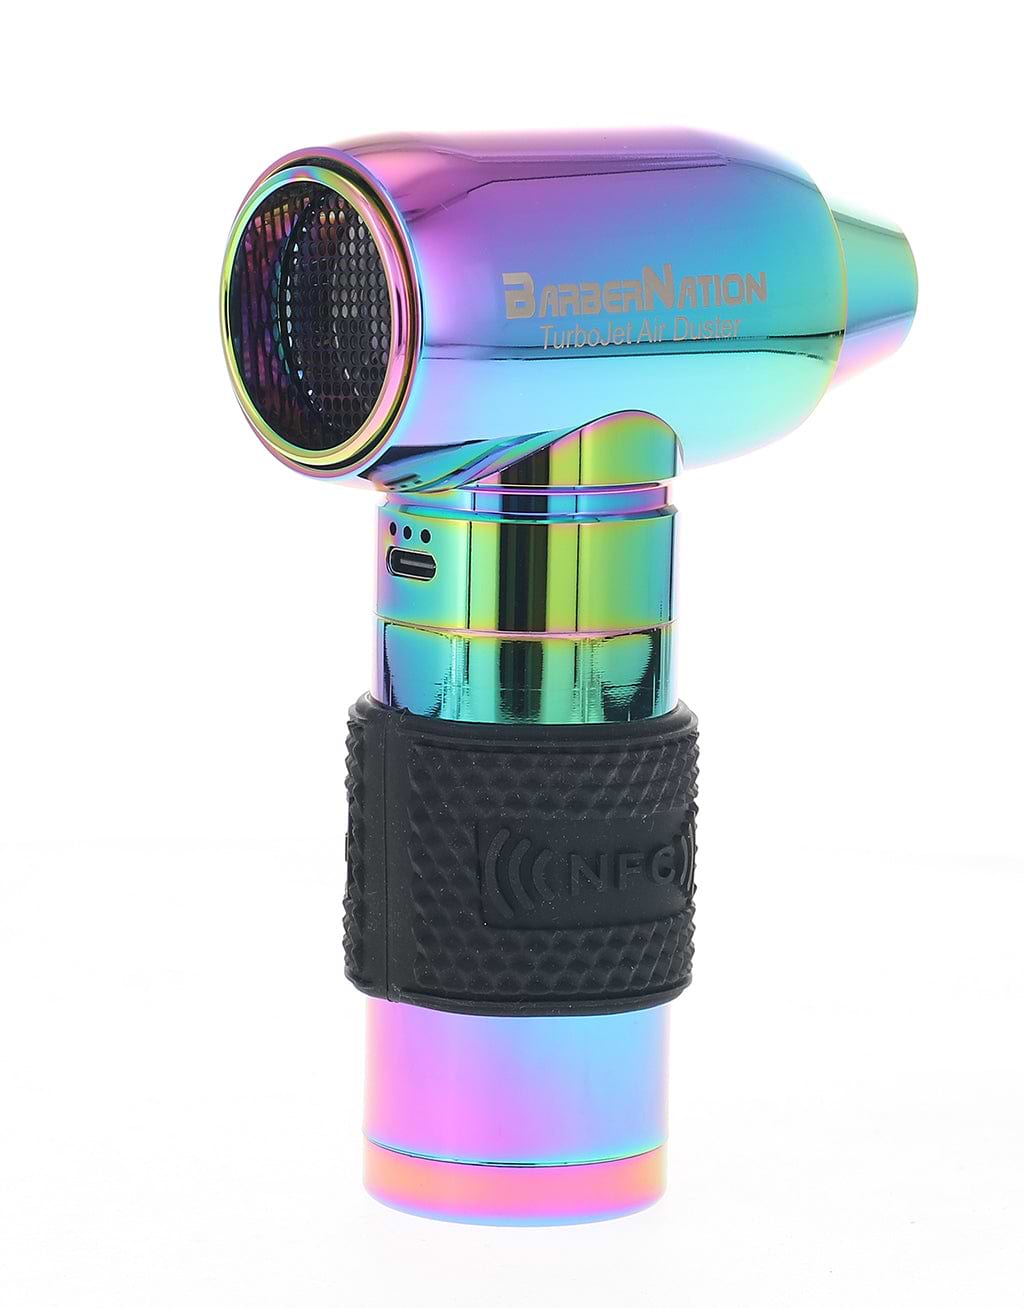 BaBylissPRO Limited Edition Iridescent LithiumFX+ Clipper & Trimmer Set (FX73HOLPKRB) with 4-in-1 TurboJet Air Duster